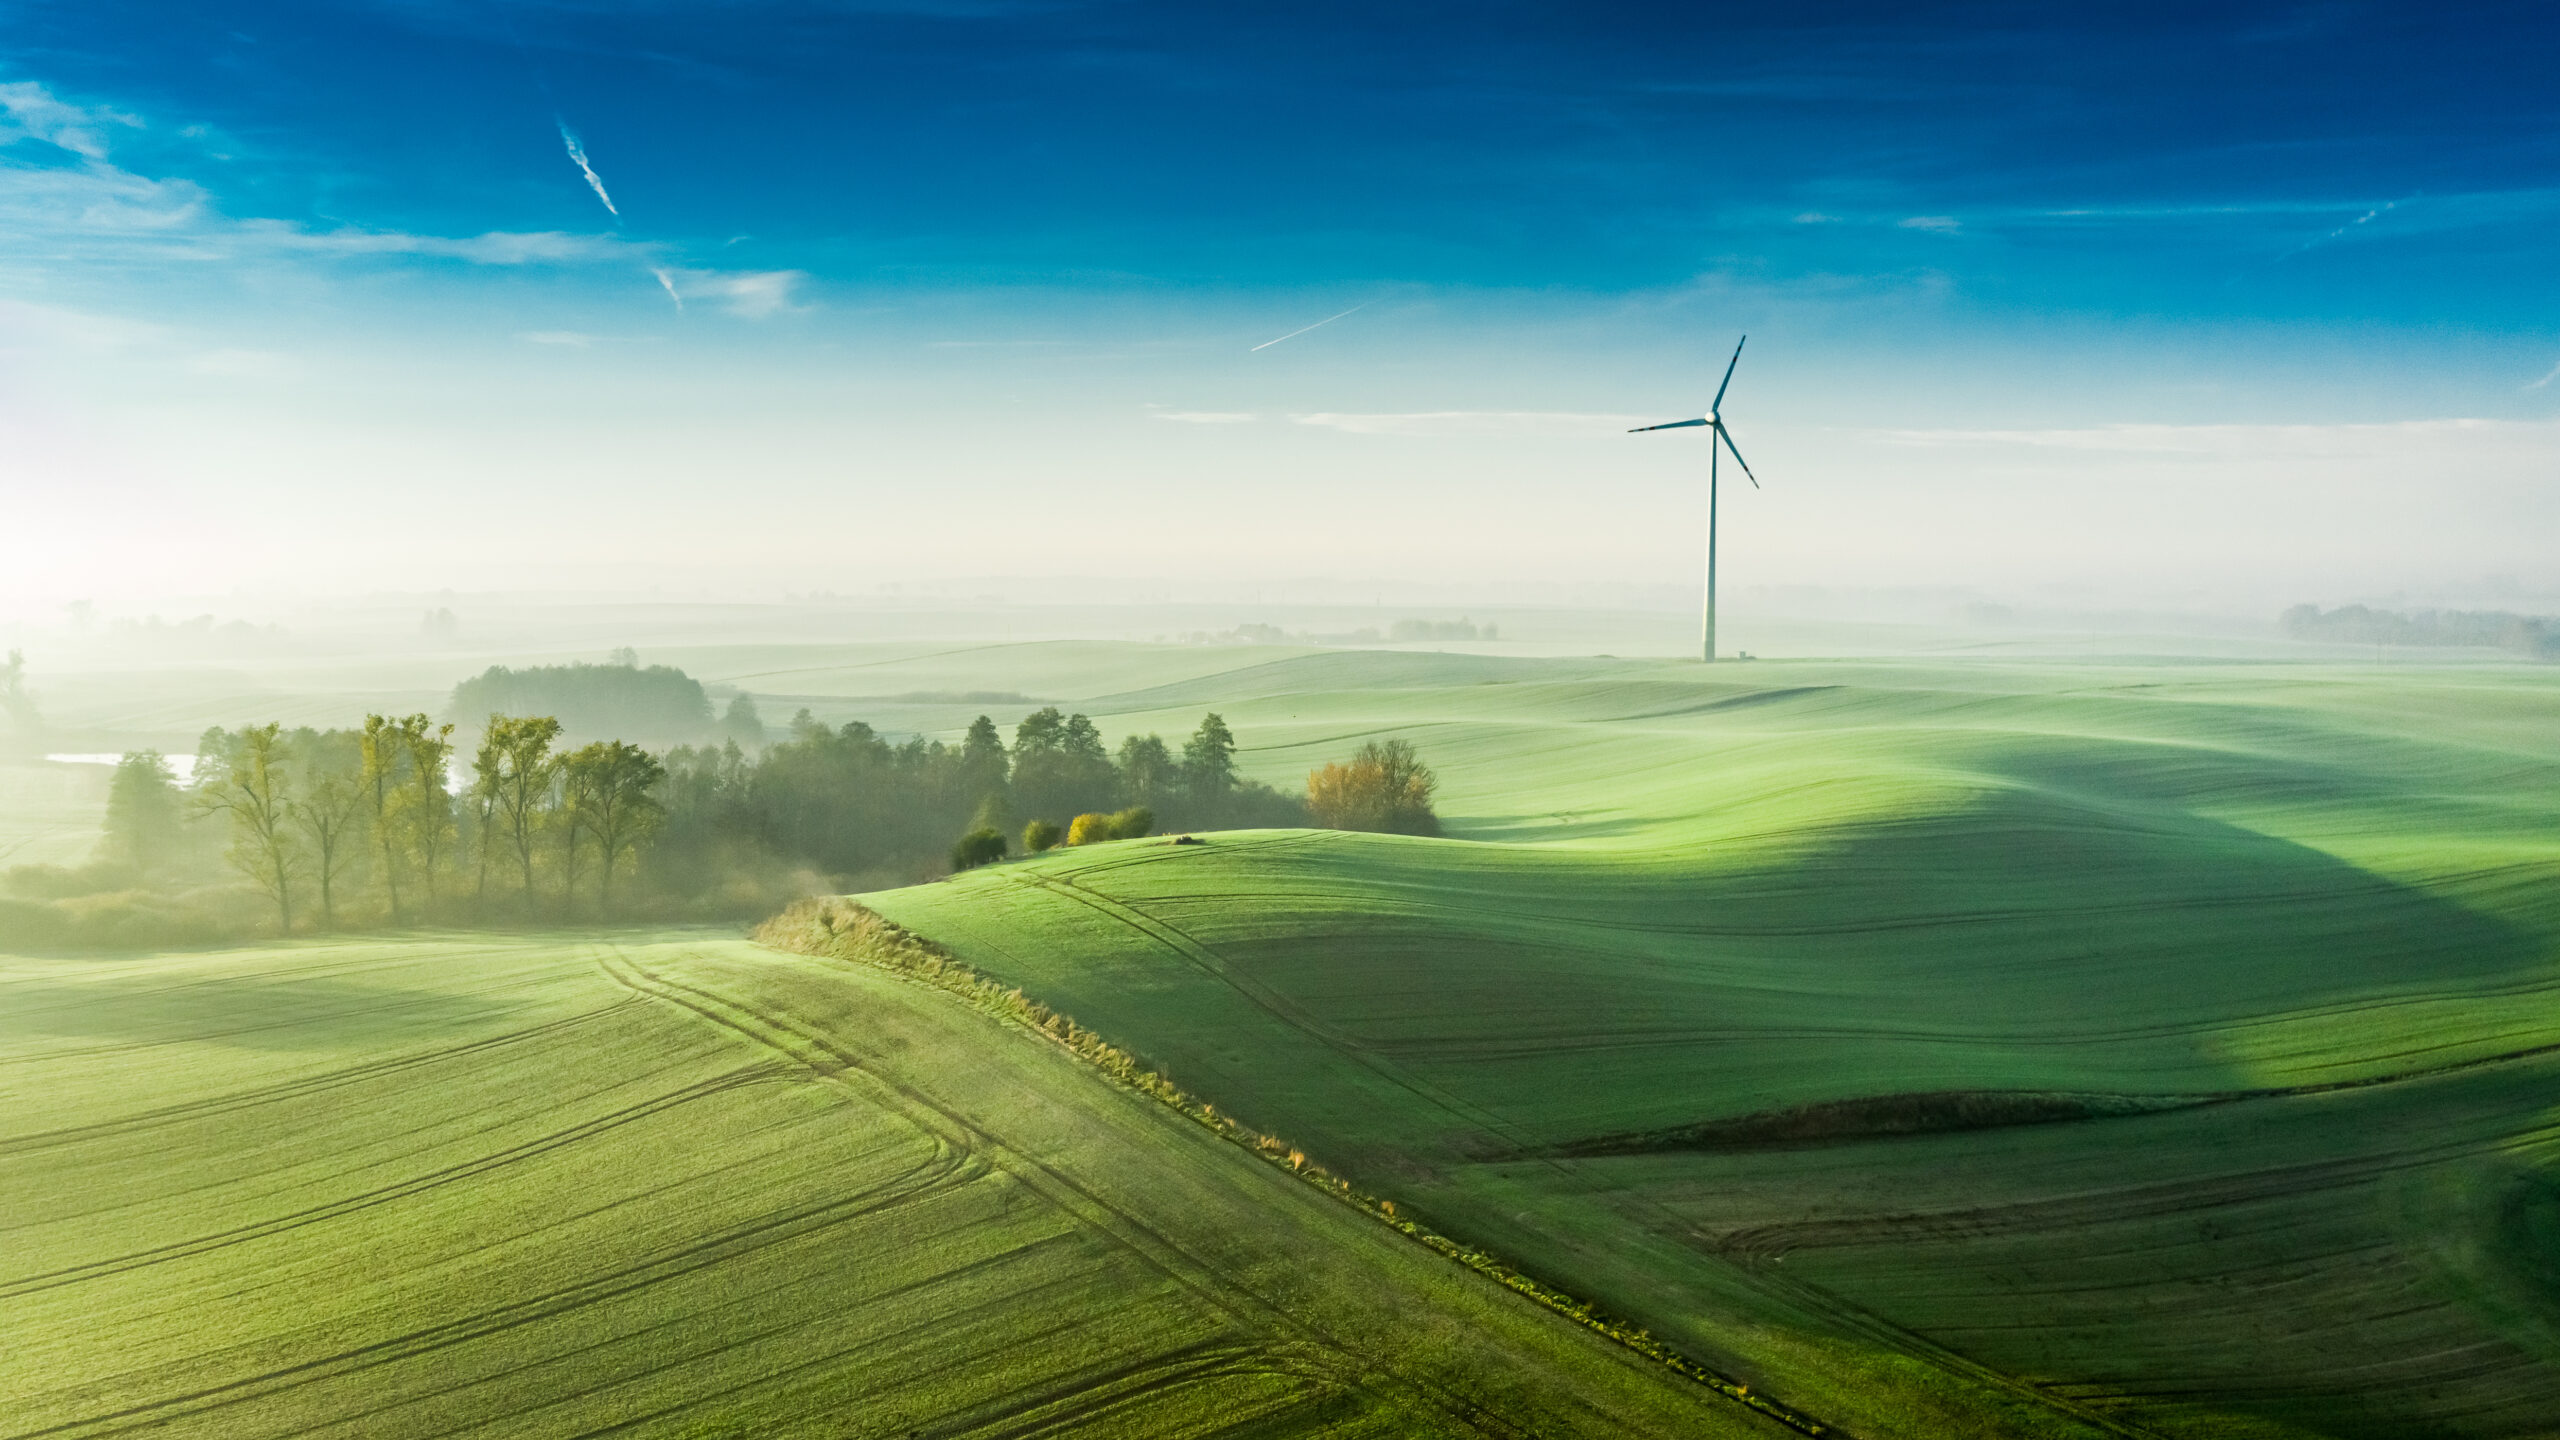 Stunning foggy wind turbine at sunrise, view from above